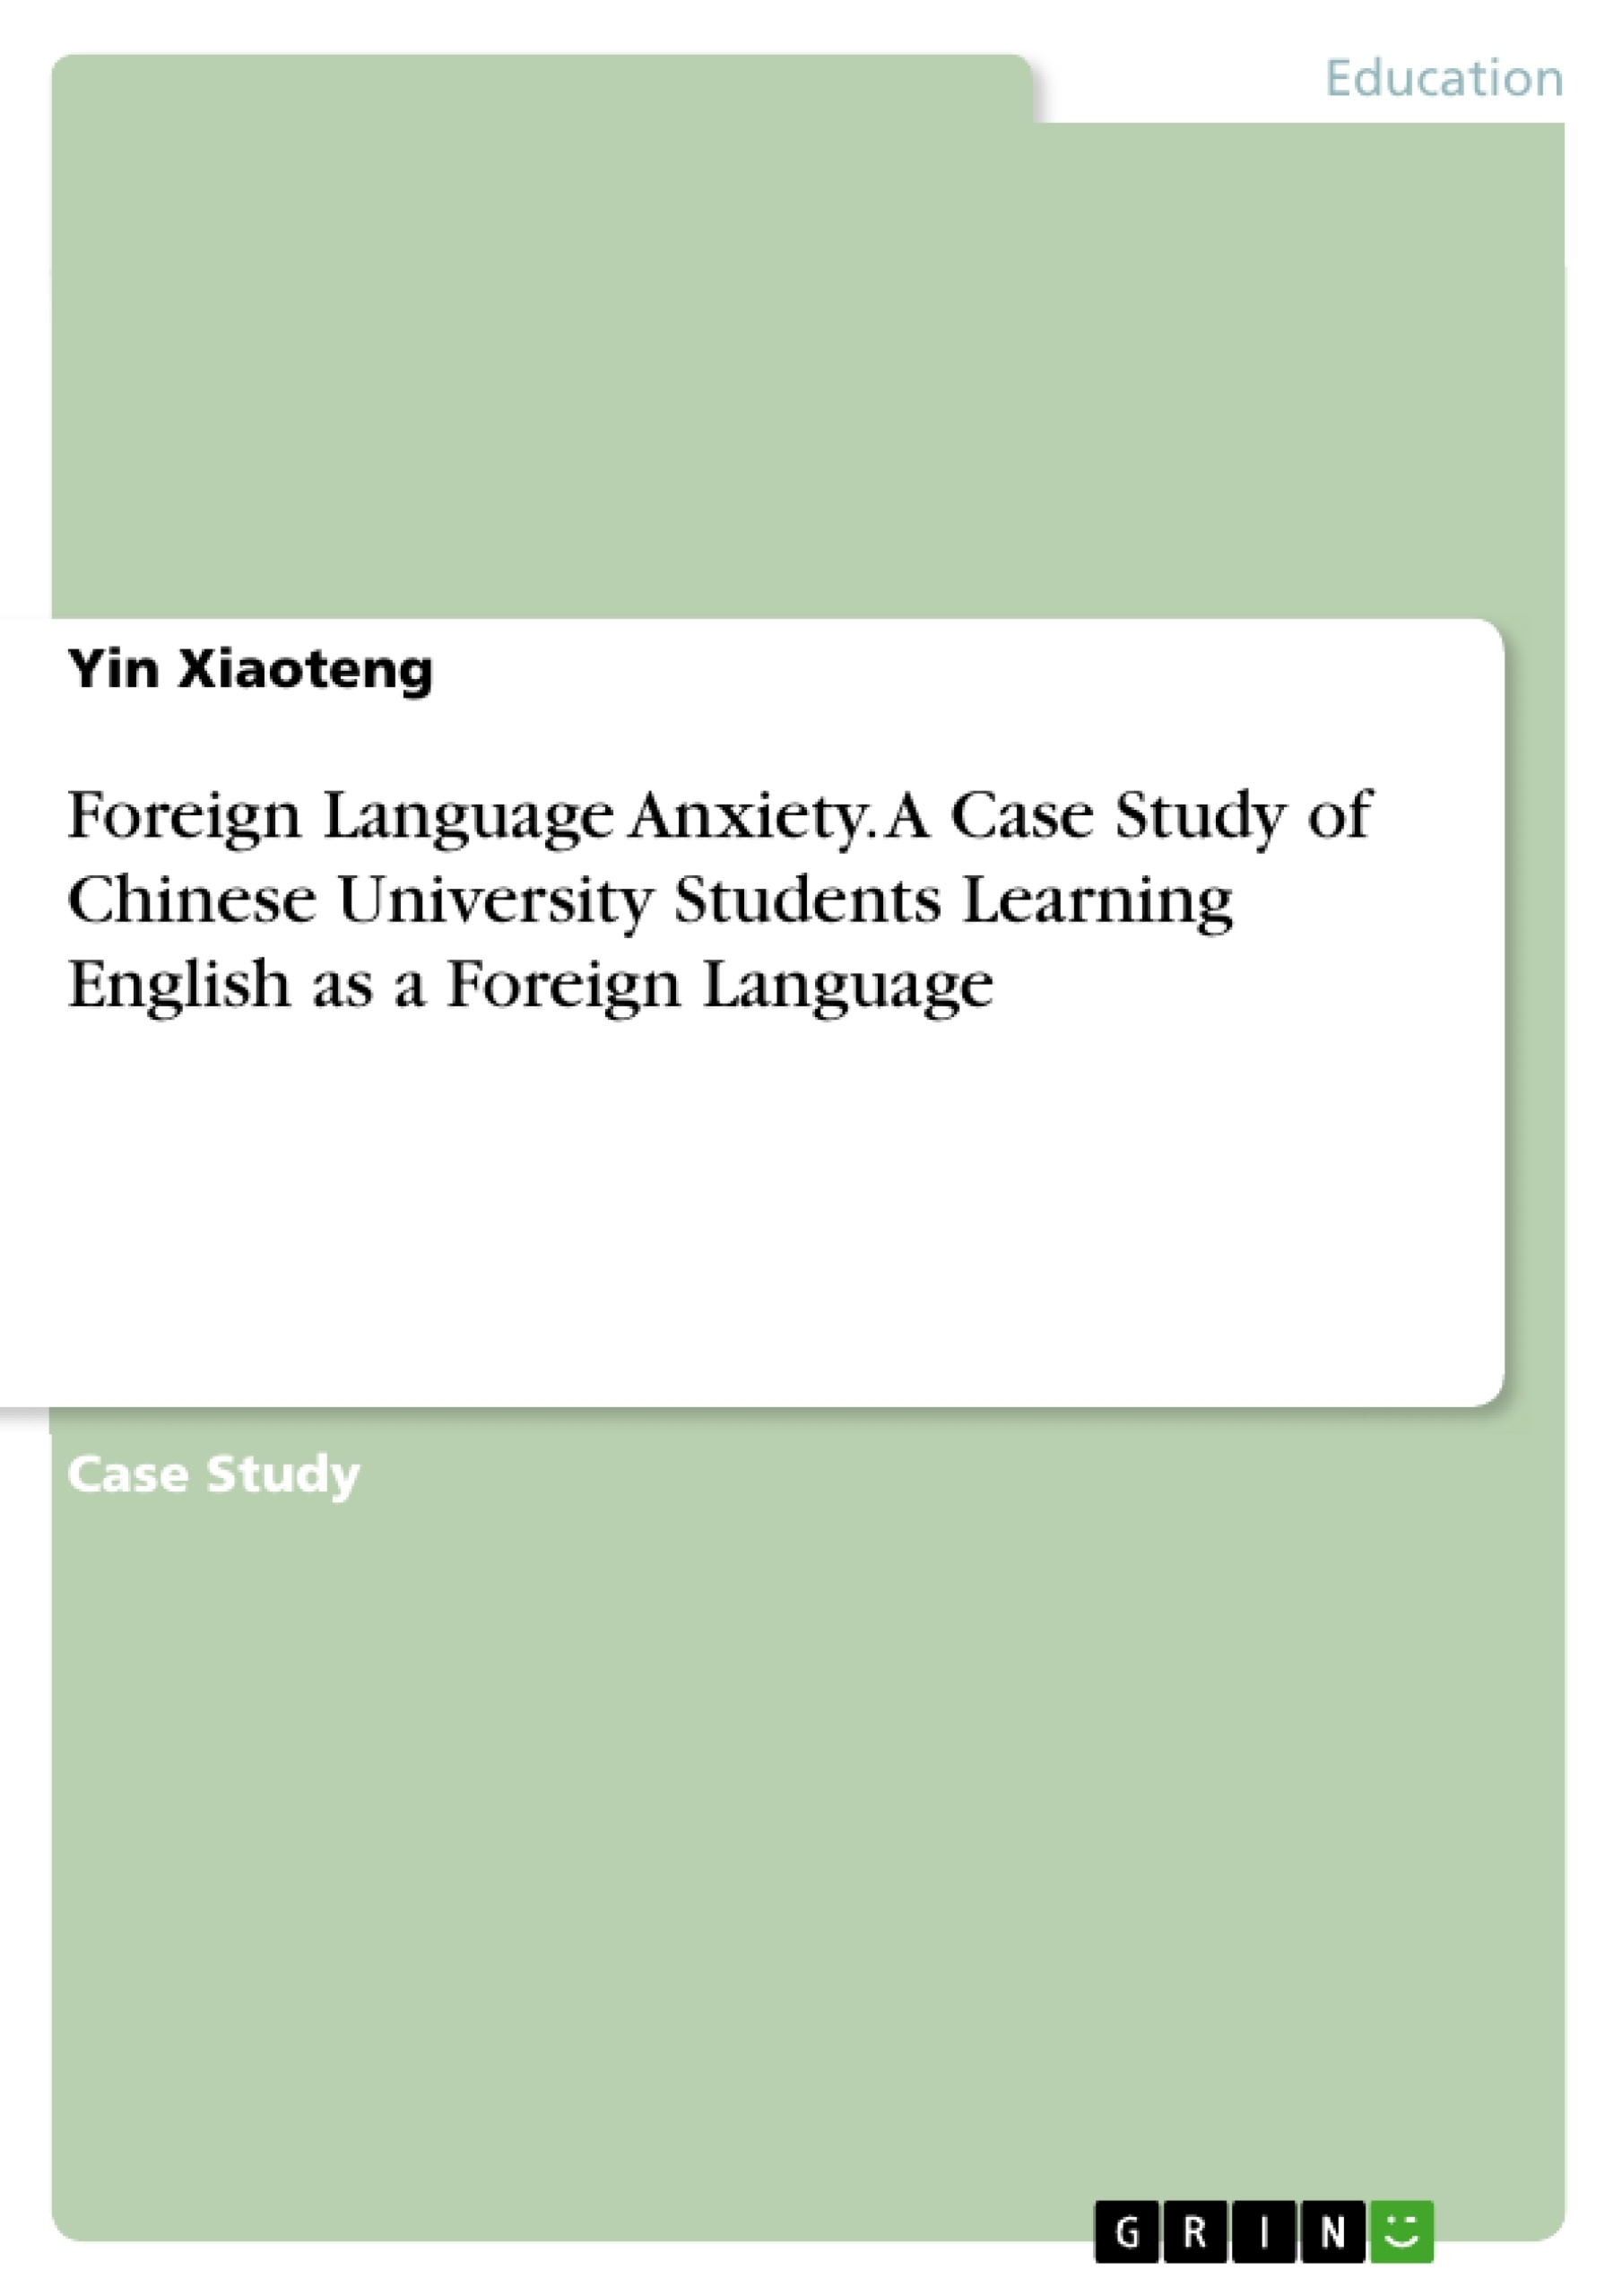 Title: Foreign Language Anxiety. A Case Study of Chinese University Students Learning English as a Foreign Language